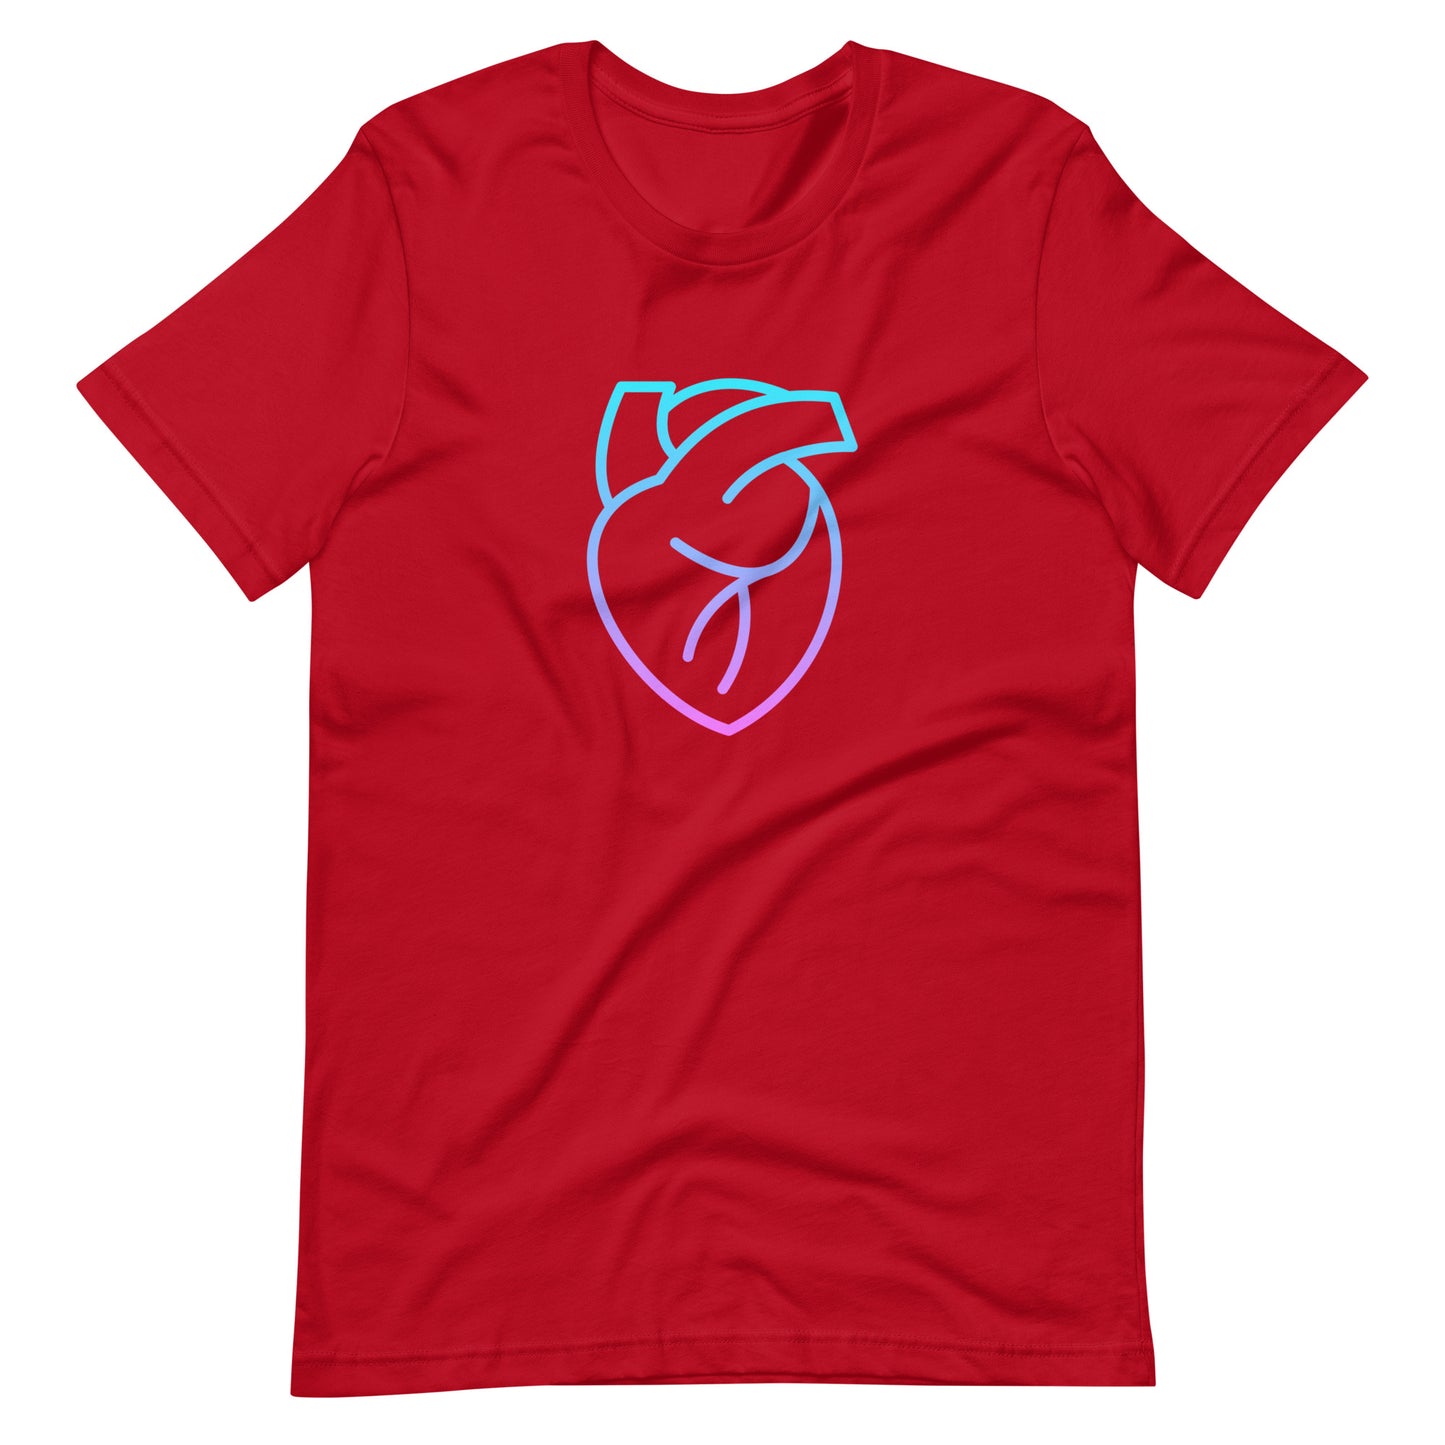 Graphic Tee, Heart, Cardiac, Cardiology, Funny Doctor Shirt, Medical Student, Funny Nurse Shirt, Funny Resident Shirt, Doctor, Physician, Resident, Nurse, PA, NP, Medical Student